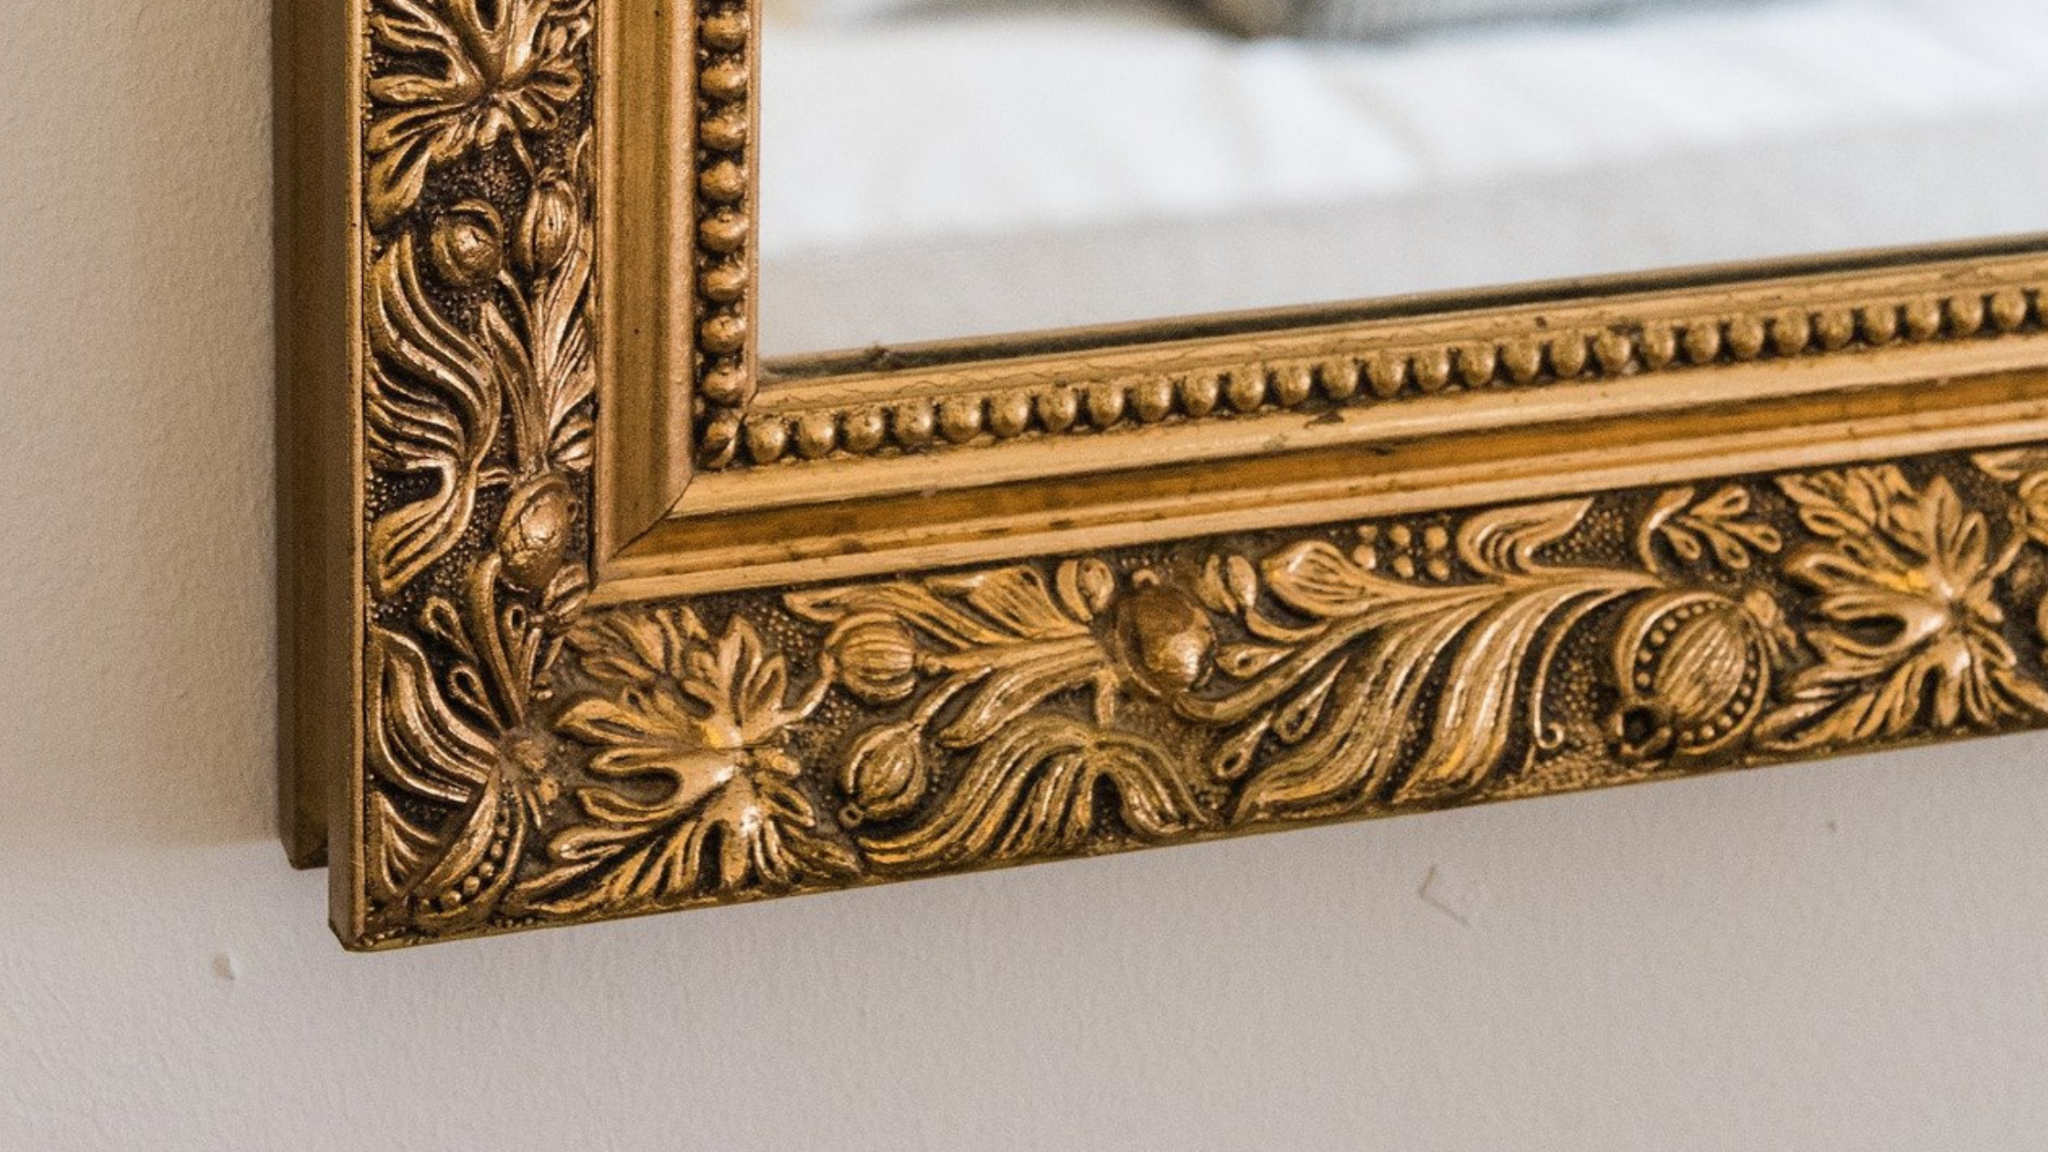 How to Care For Your Antique Mirrors - Bespoke Mirrors, Art Deco Mirrors